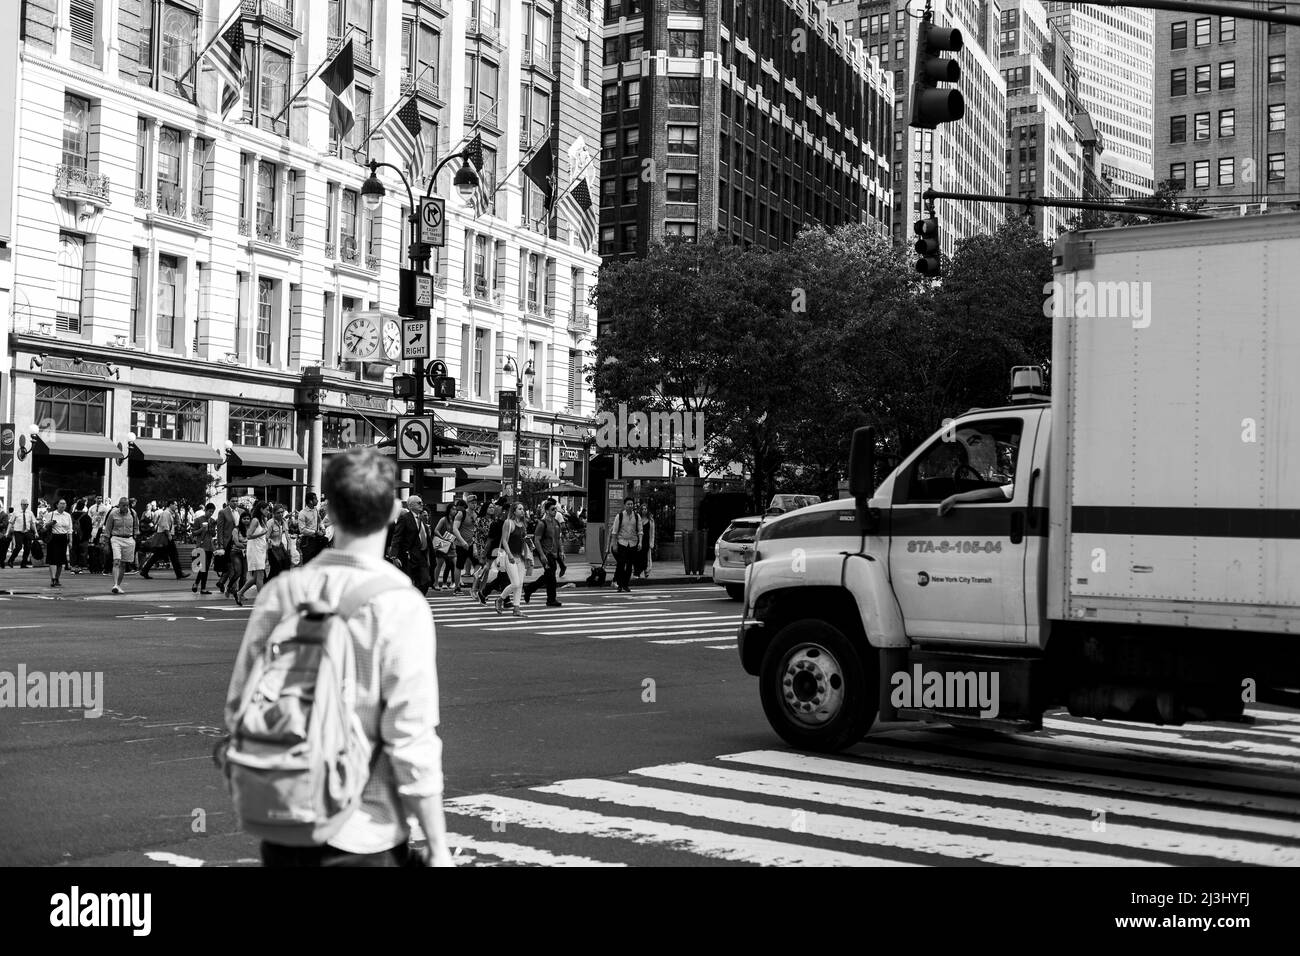 Midtown South, New York City, NY, USA, Street Scene with People Banque D'Images